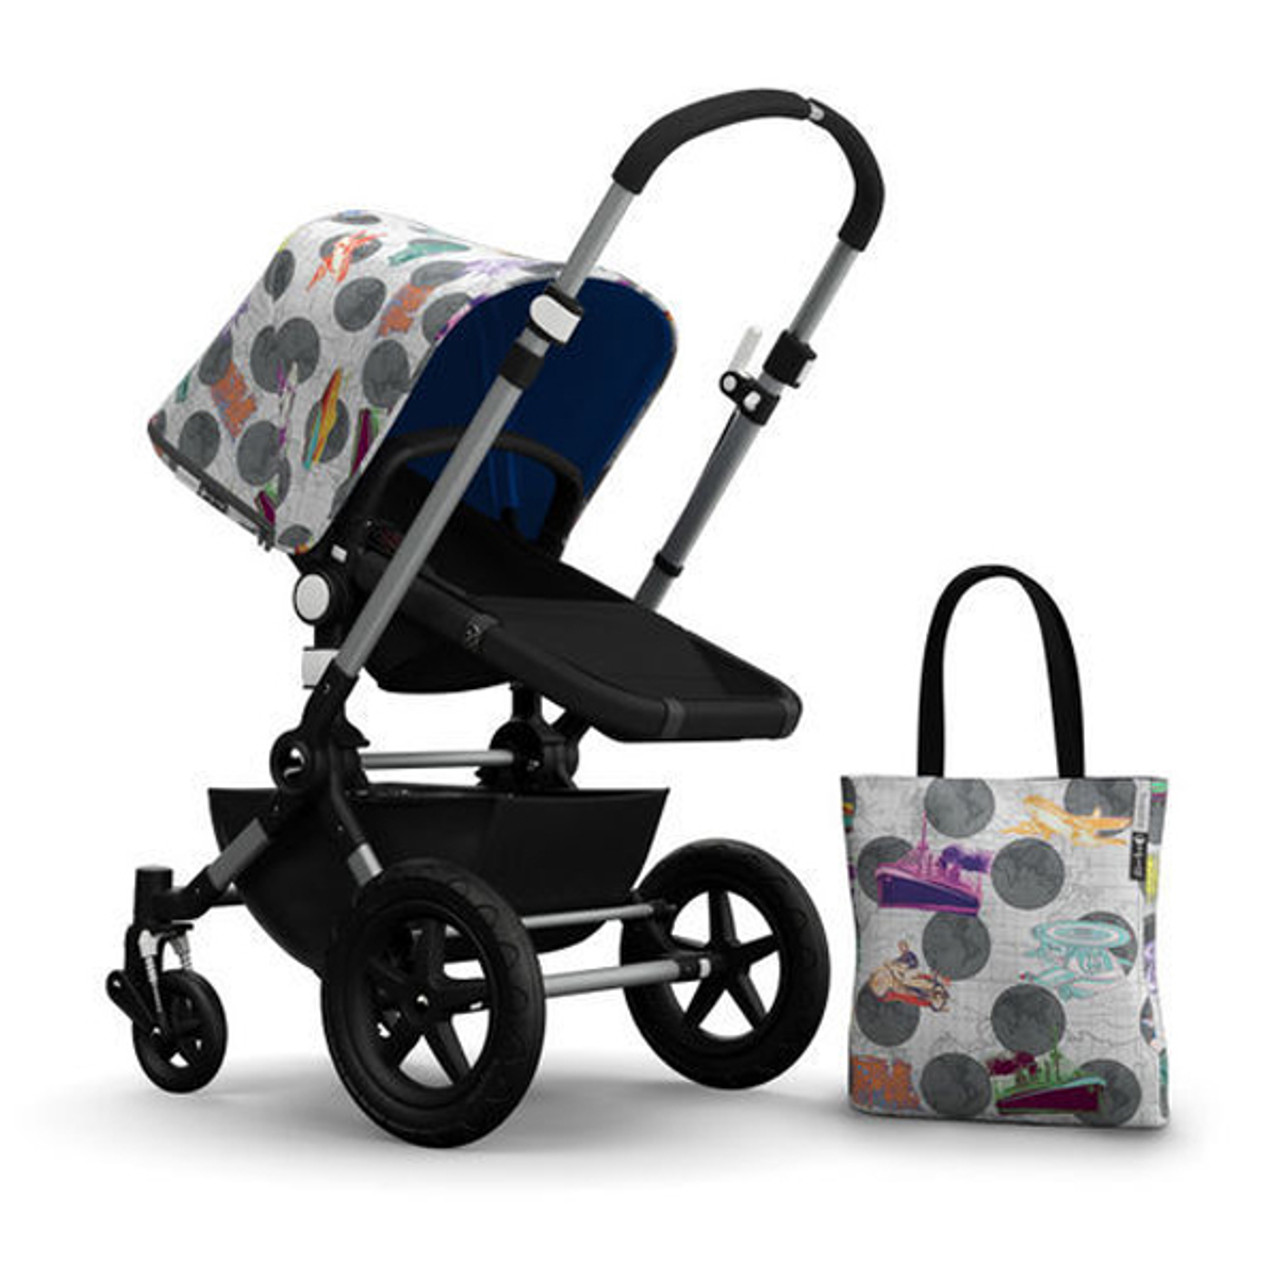 Bugaboo Cameleon3 Andy Warhol Accessory Pack Globetrotter/Royal Blue